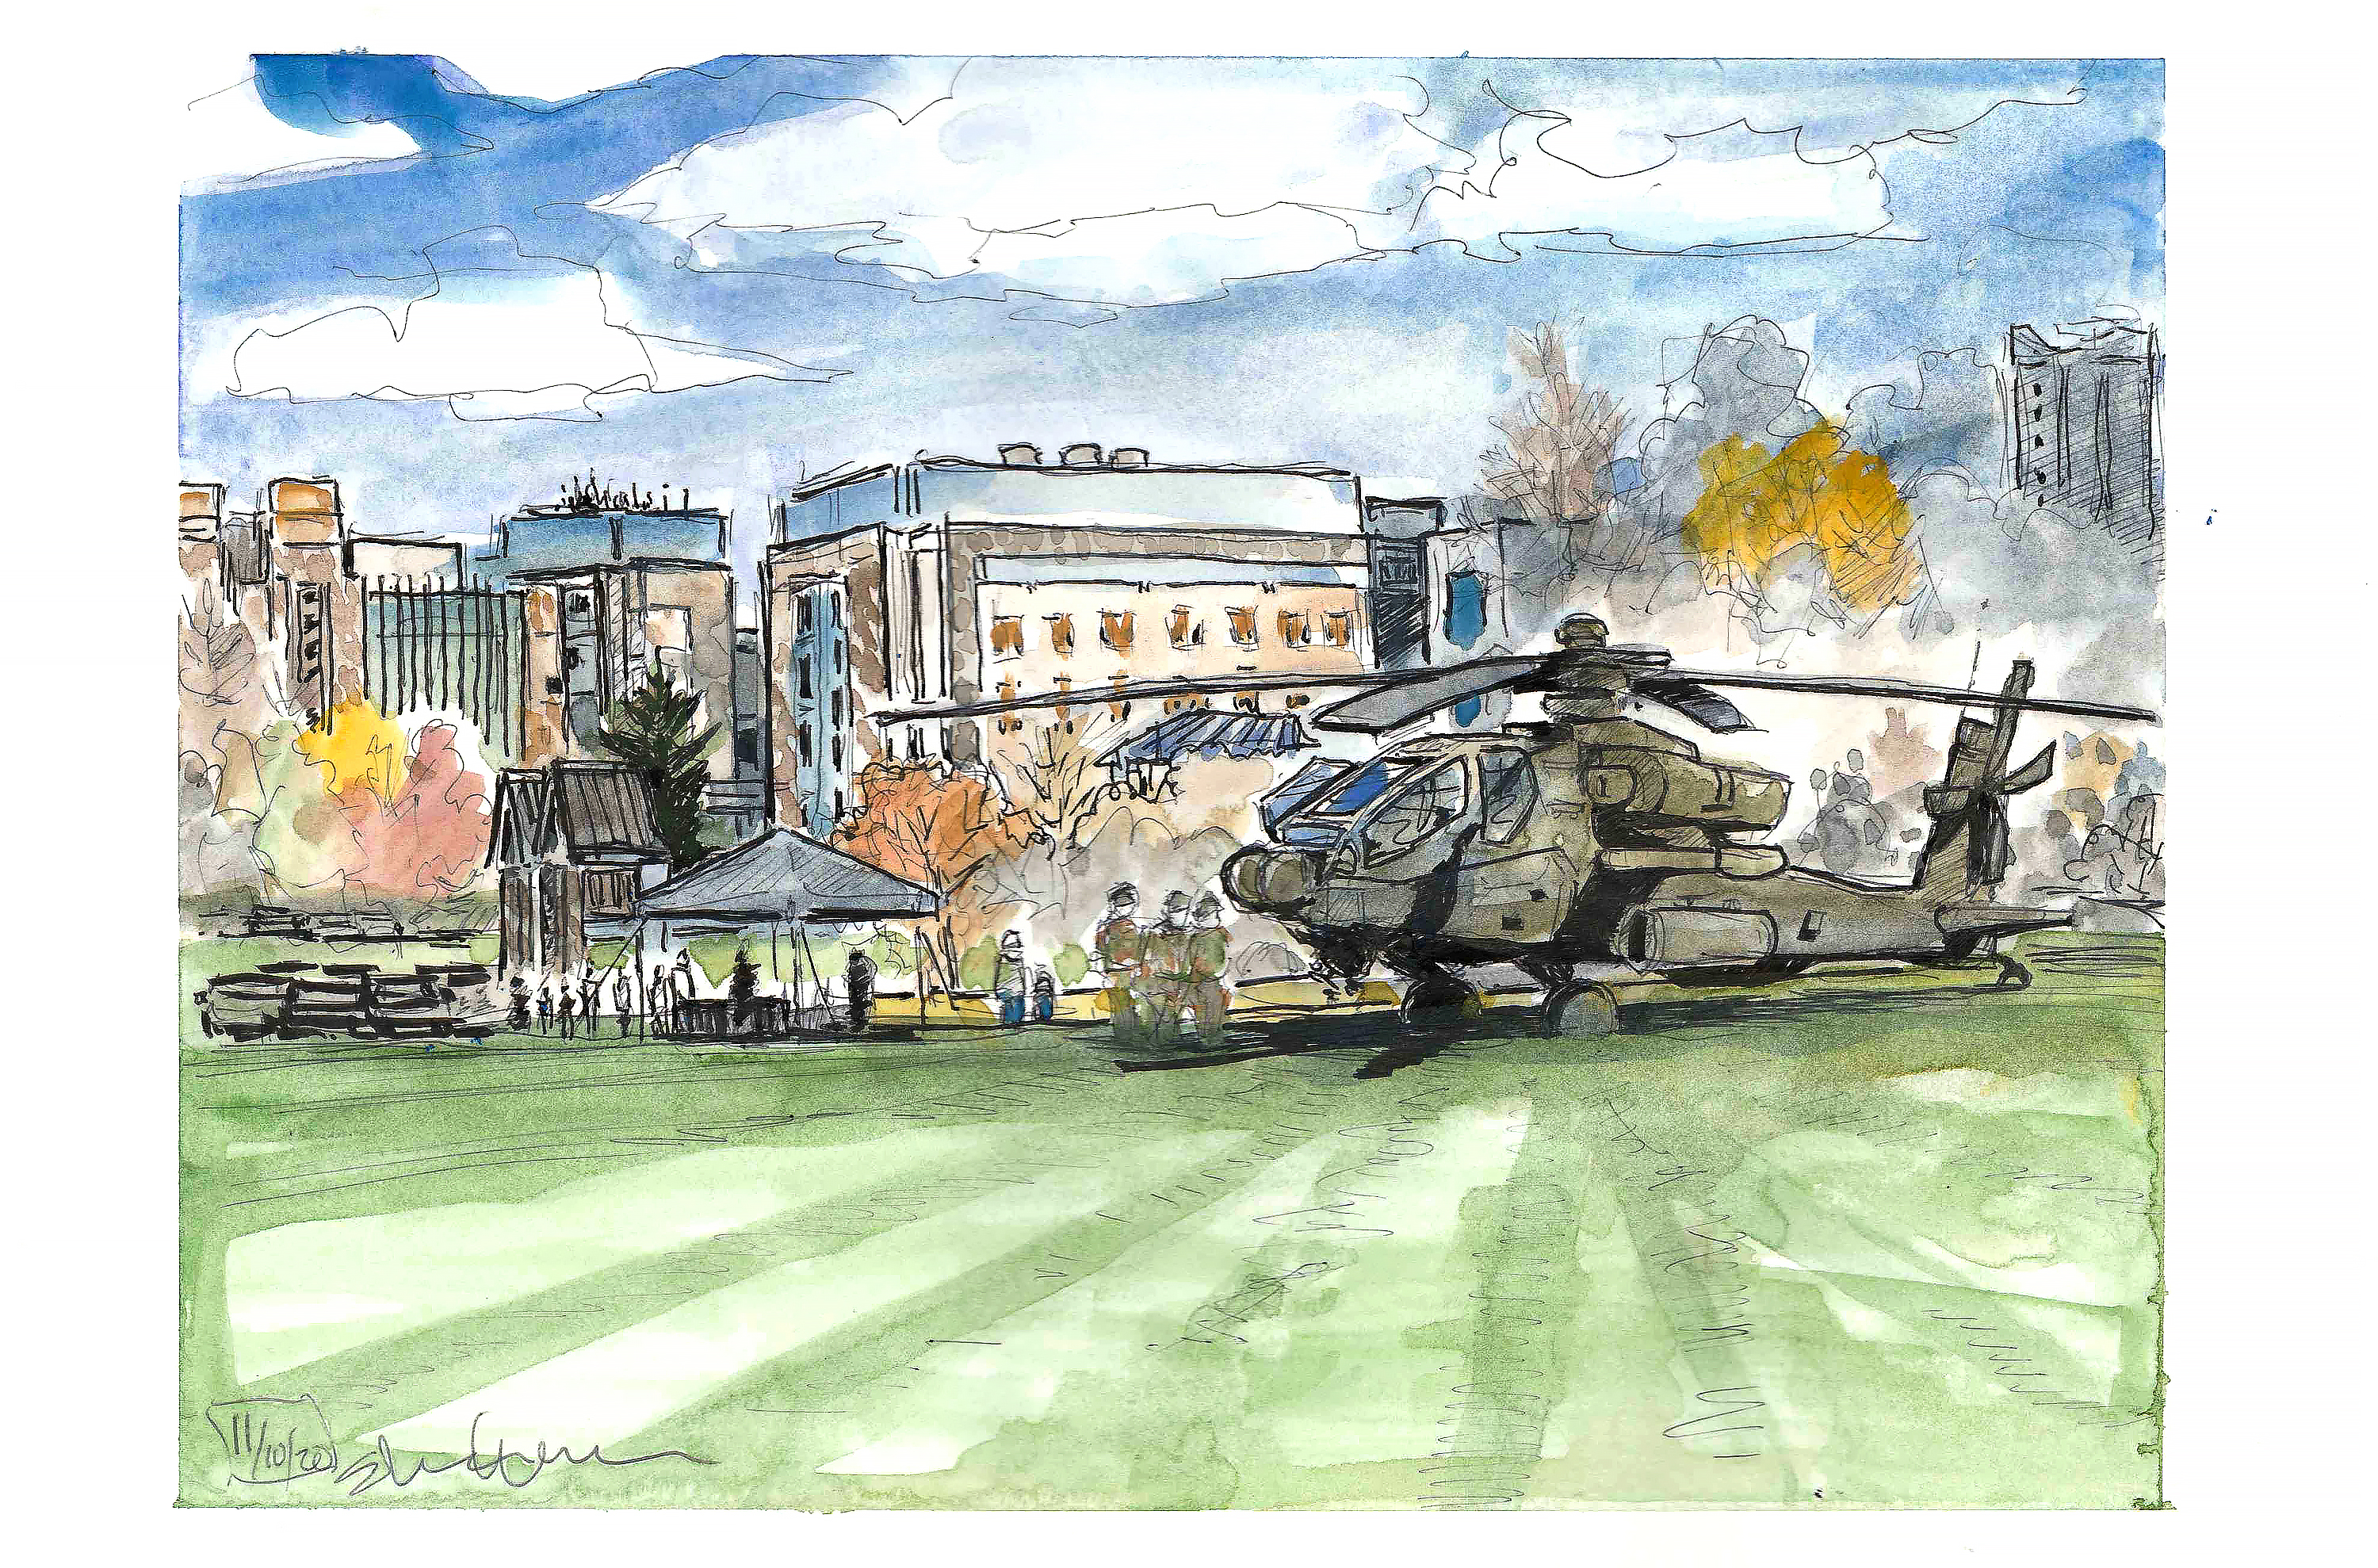 Apache Helicopter on Holtzman Alumni Center lawn -- Appeared on Nov. 16, 2020